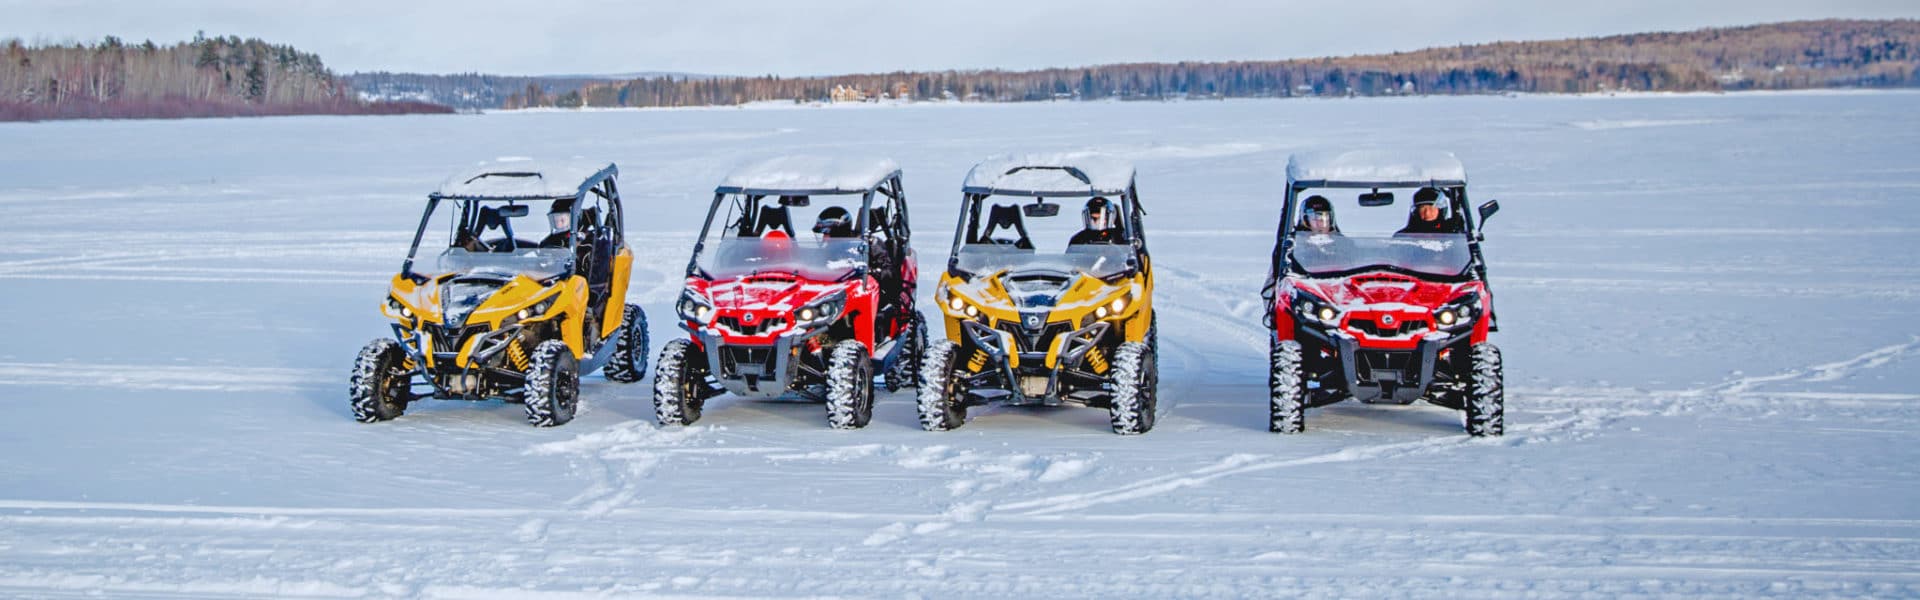 buggy canada sejour hiver